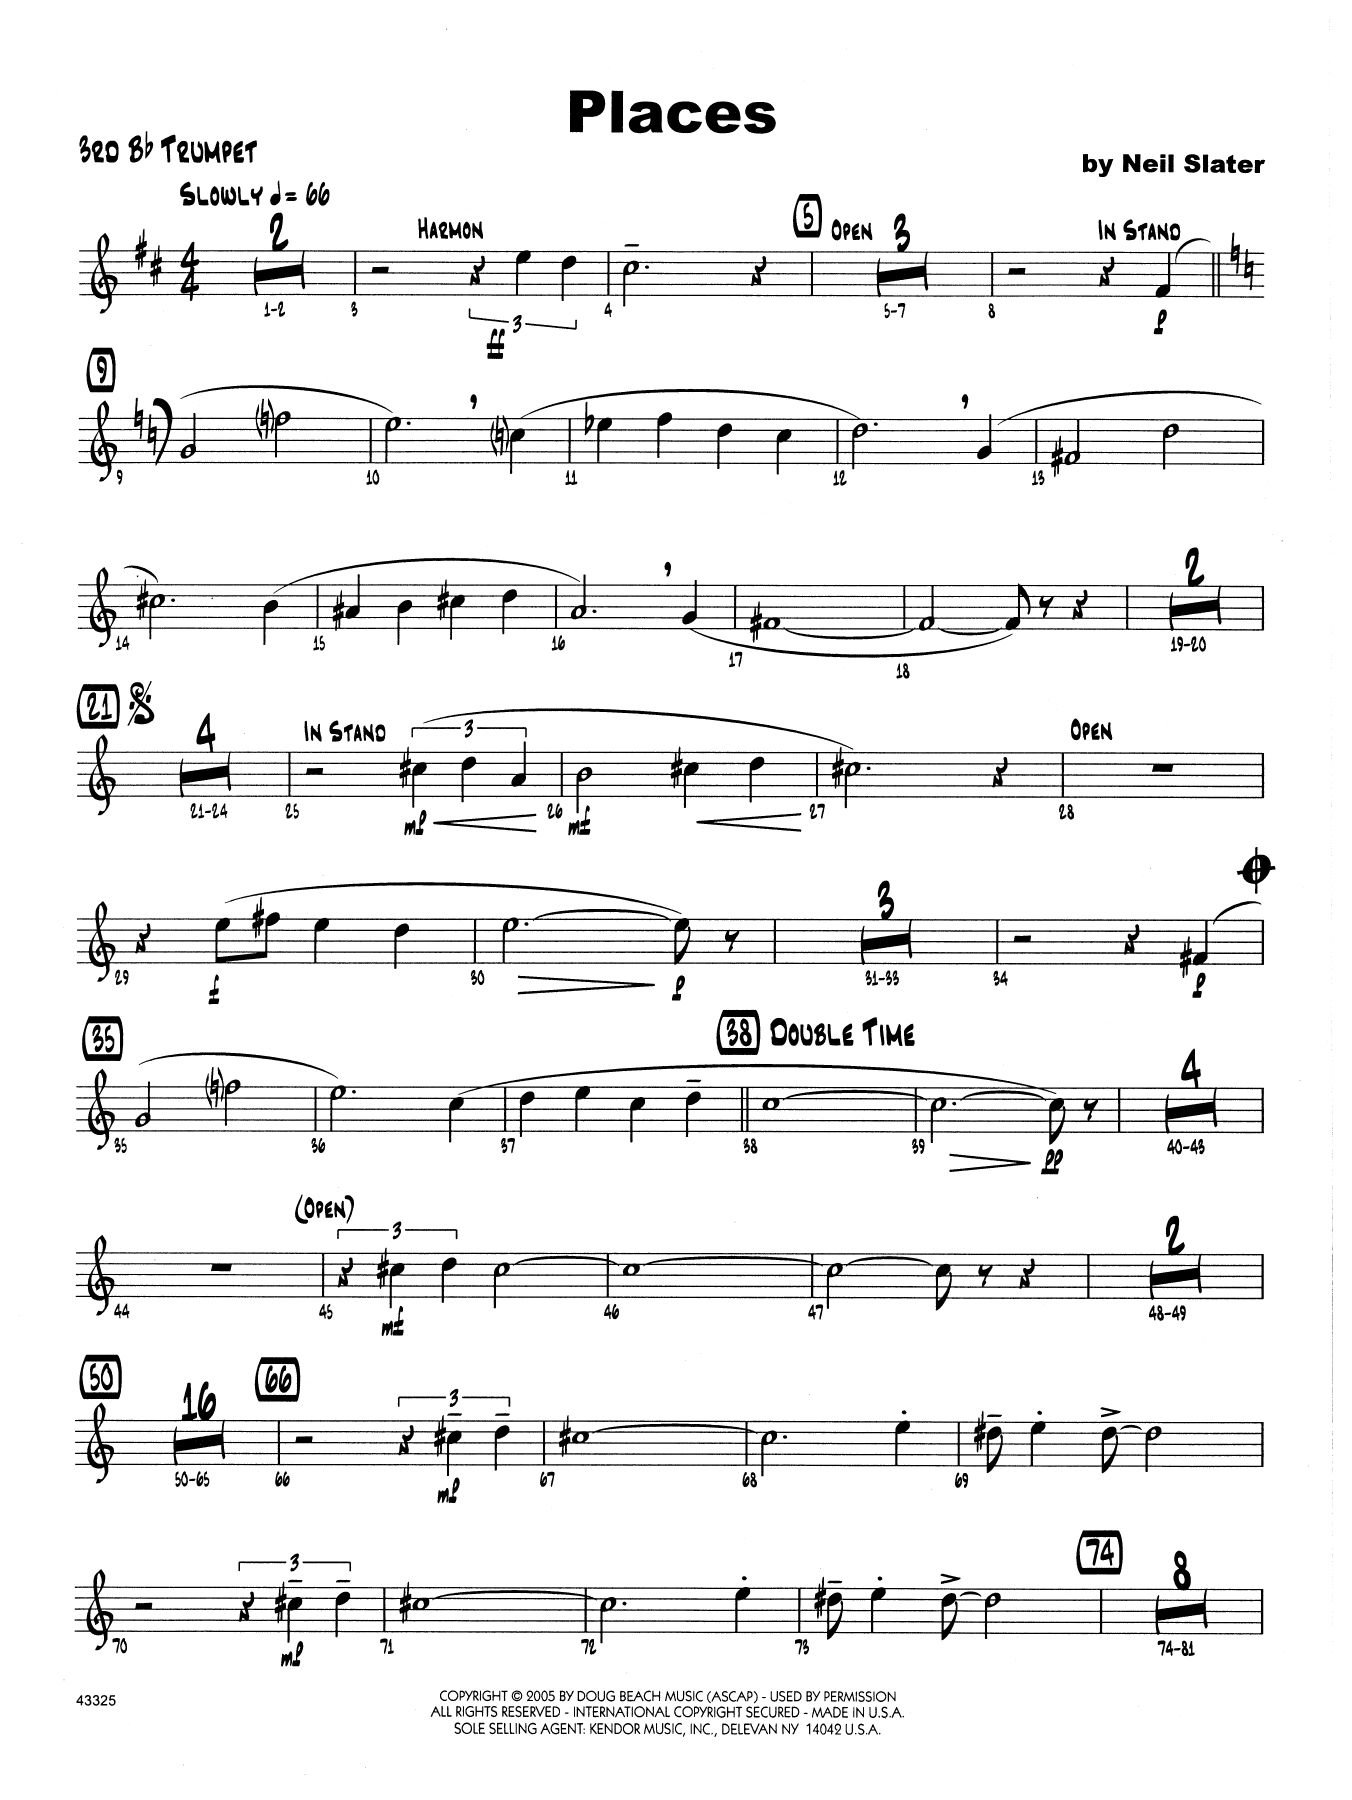 Download Neil Slater Places - 3rd Bb Trumpet Sheet Music